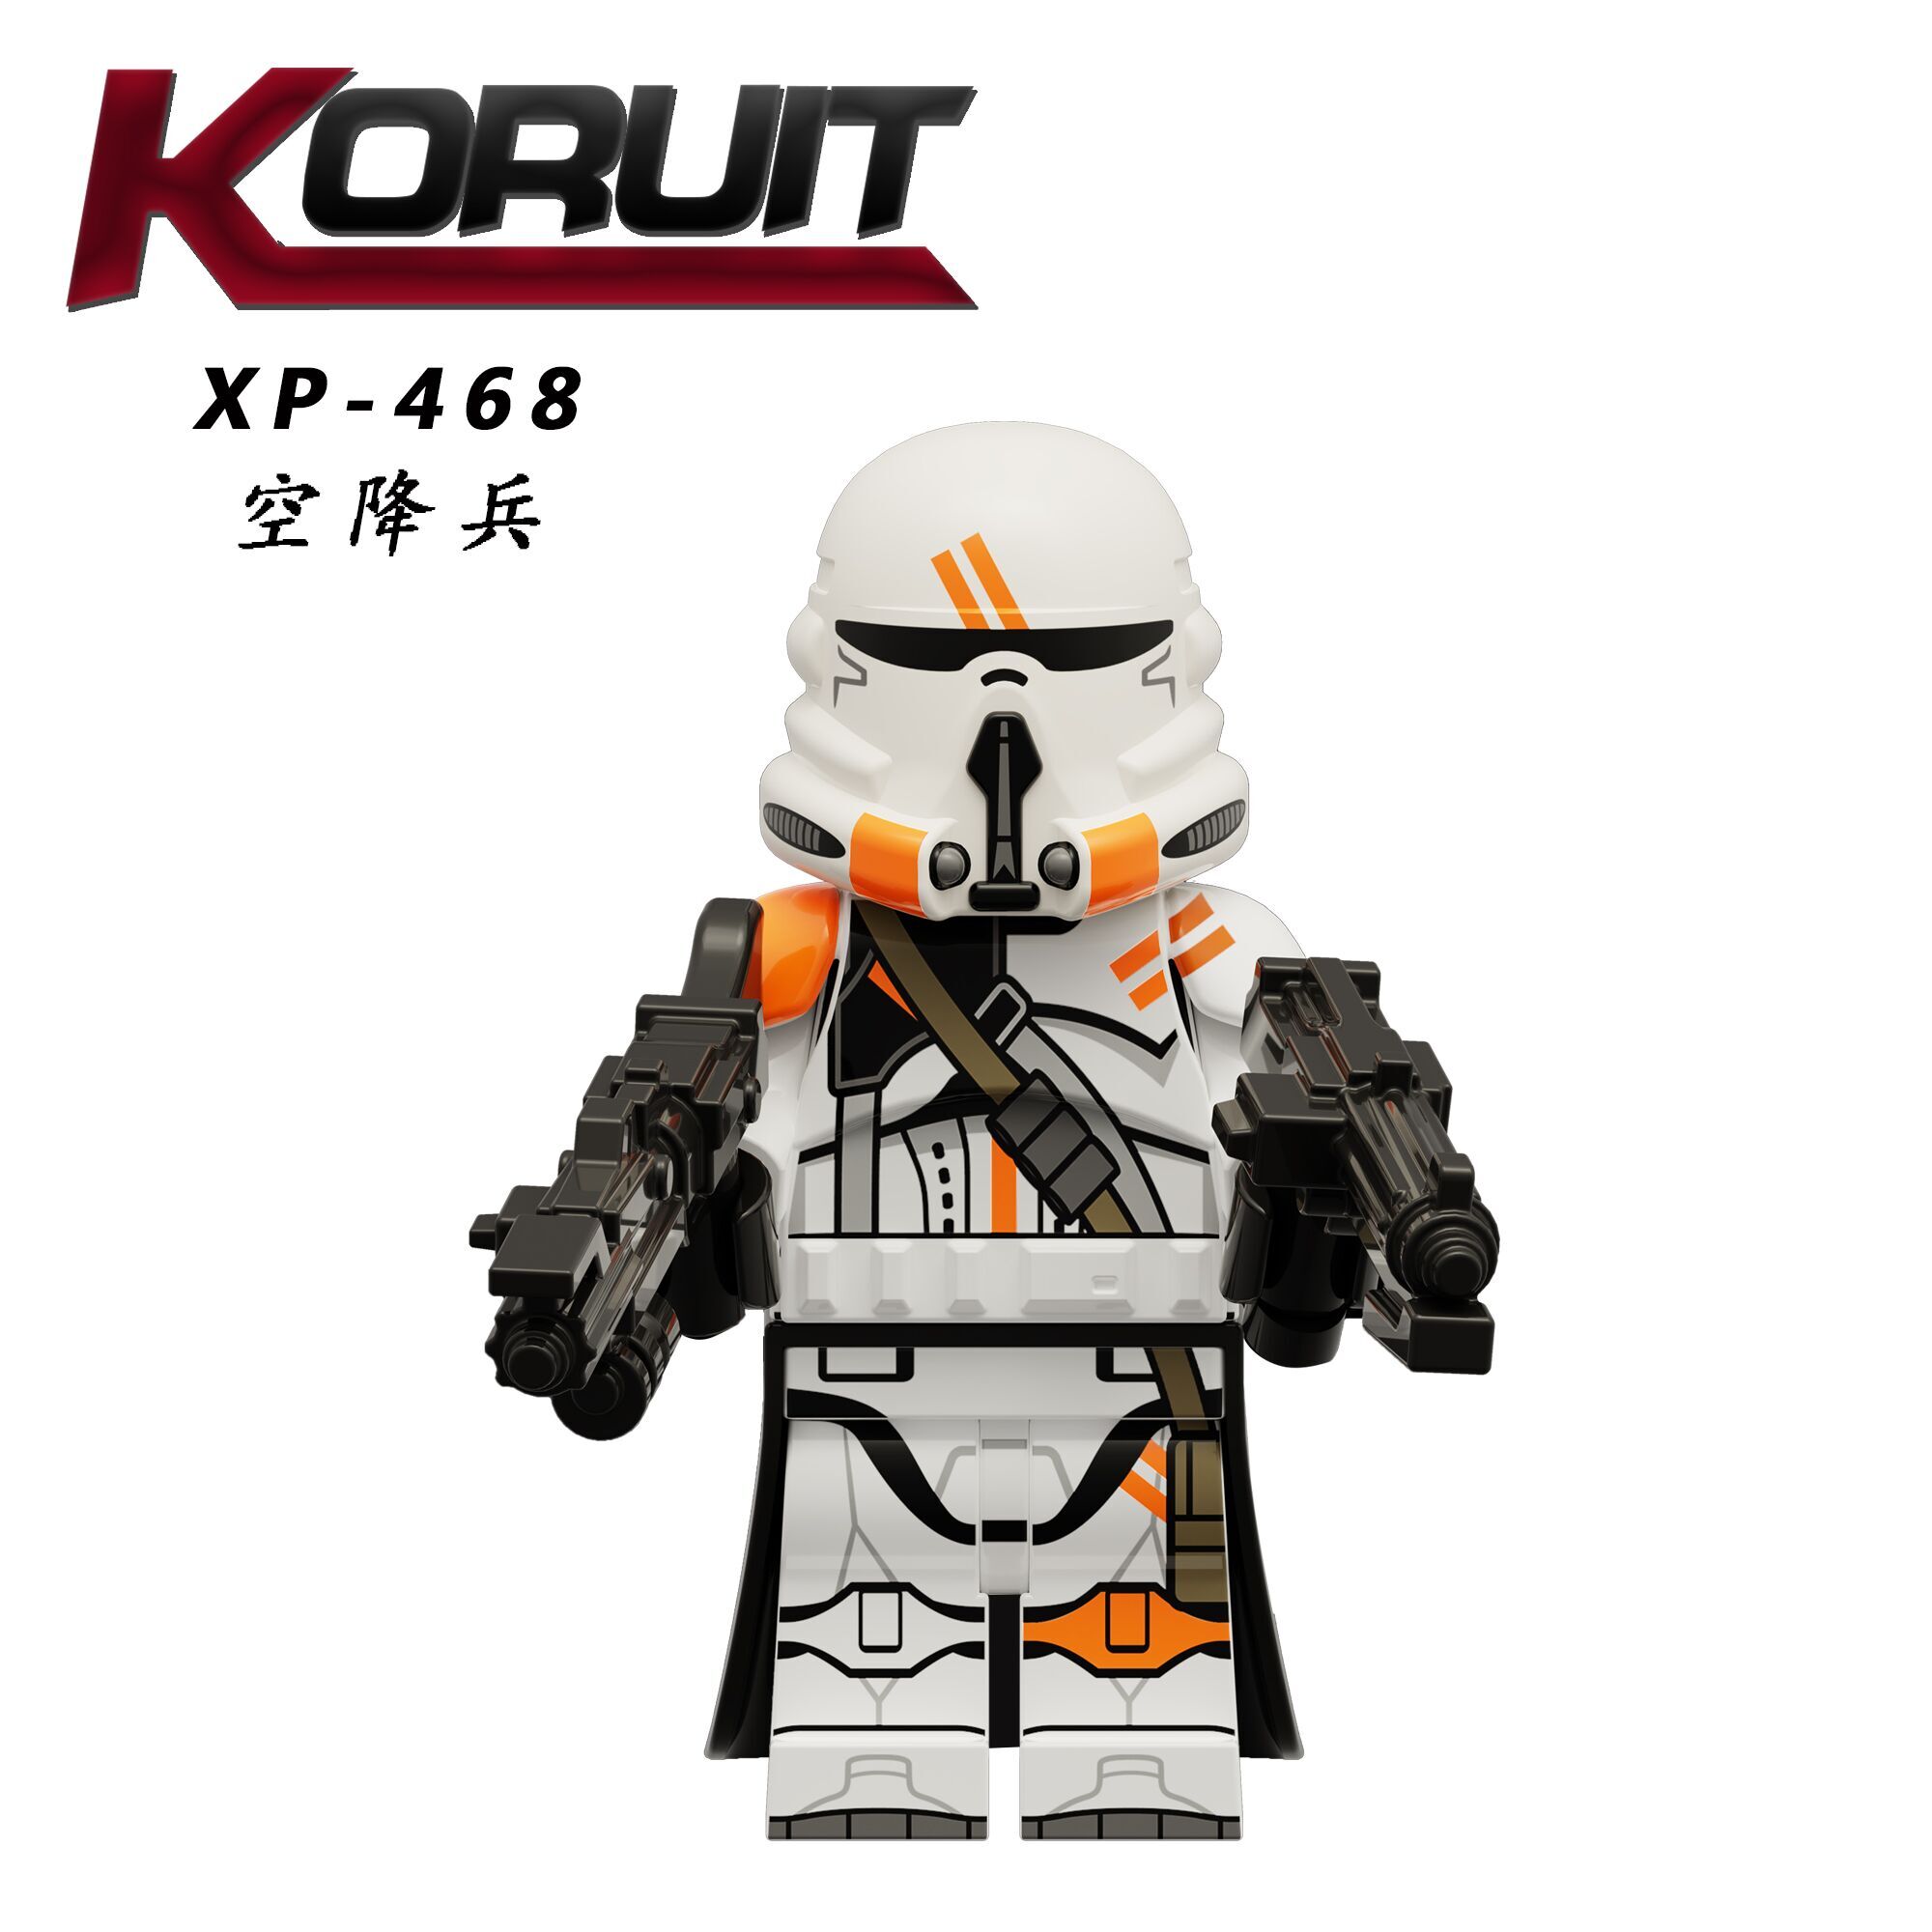 XP467 XP468 Star Wars Series Building Blocks Bricks Airborn Strooper Action Figures Educational Toys For Kids Gifts